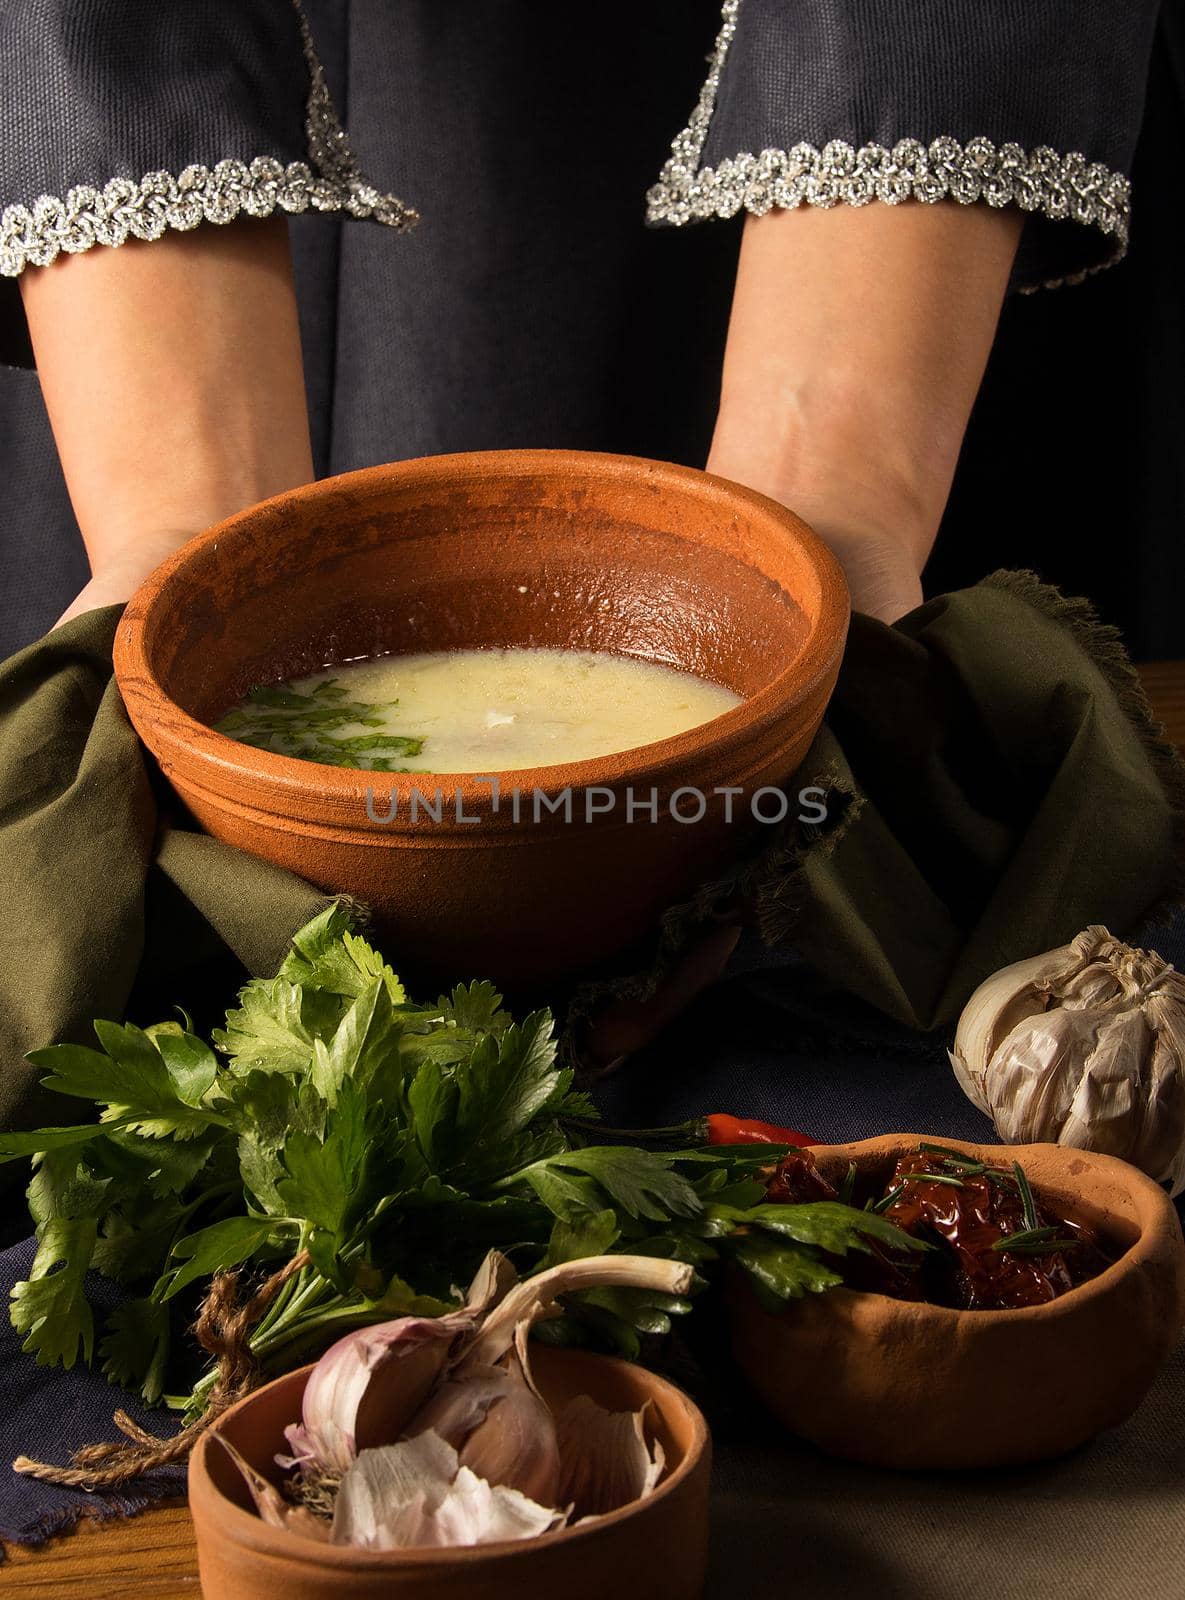 Shot of a dish in hands by A_Karim